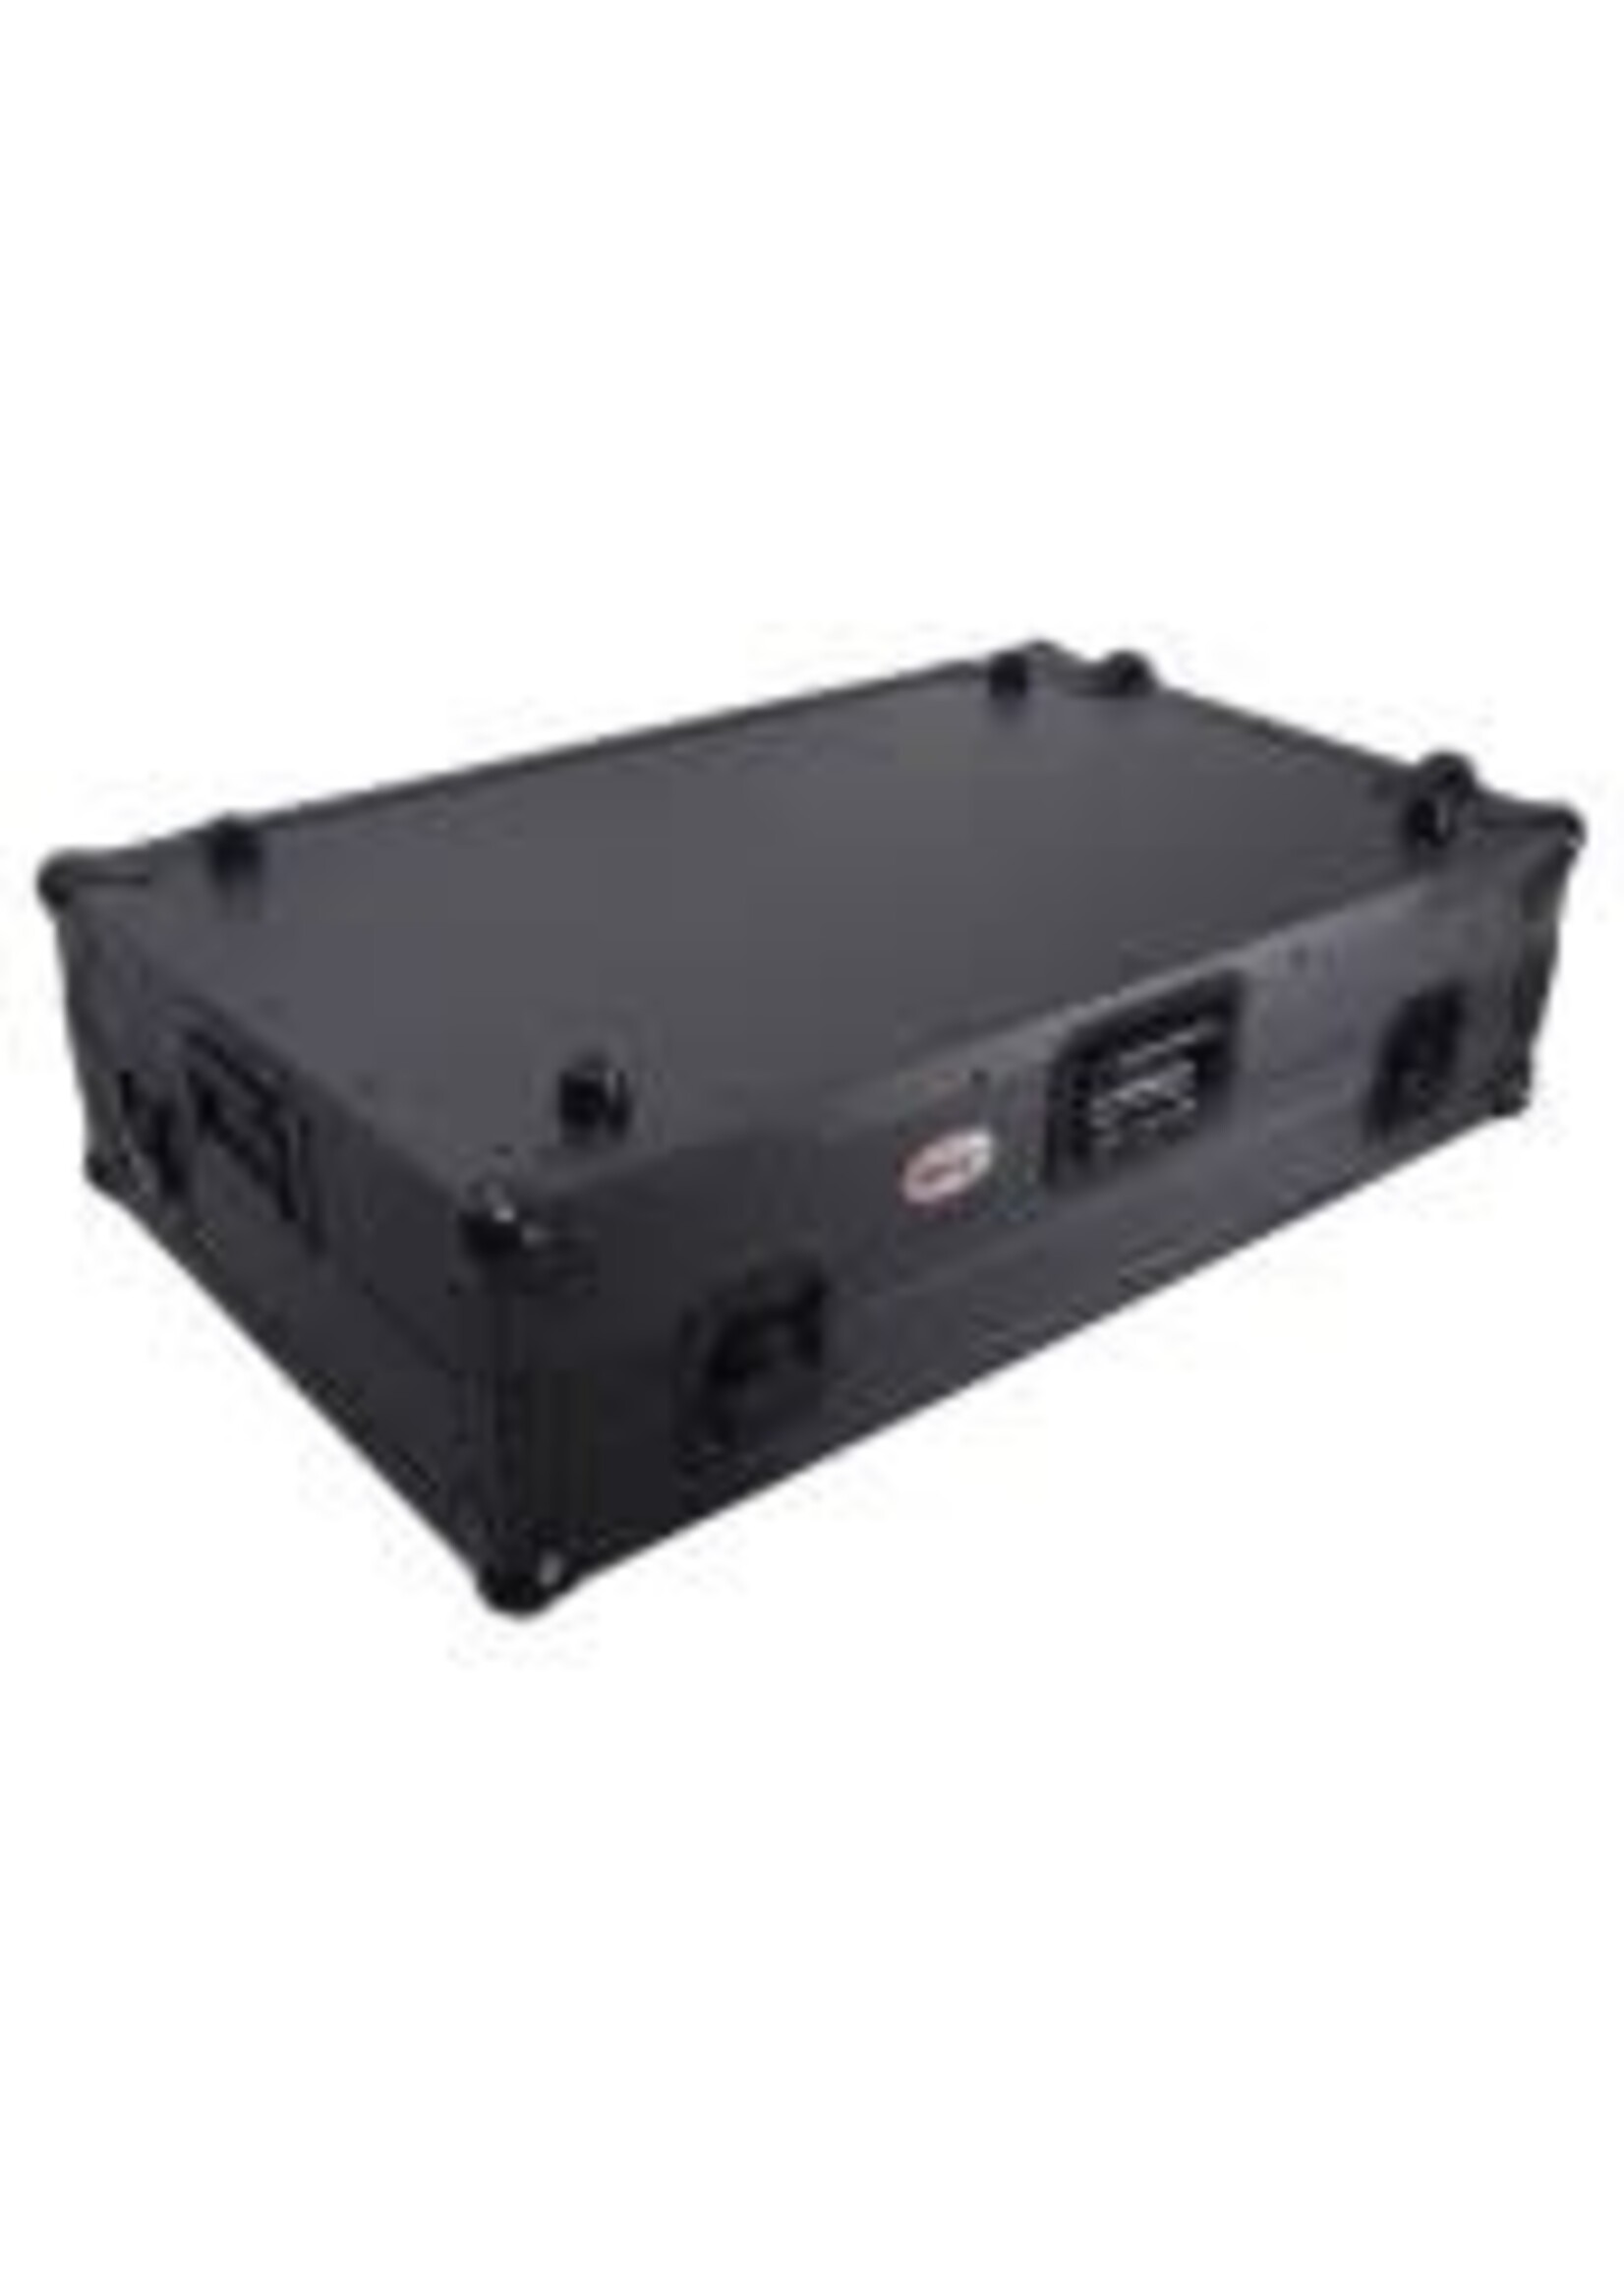 ProX ATA Flight Style Road Case For RANE Four DJ Controller with Laptop Shelf 1U Rack Space LED and Wheels - Black Finish